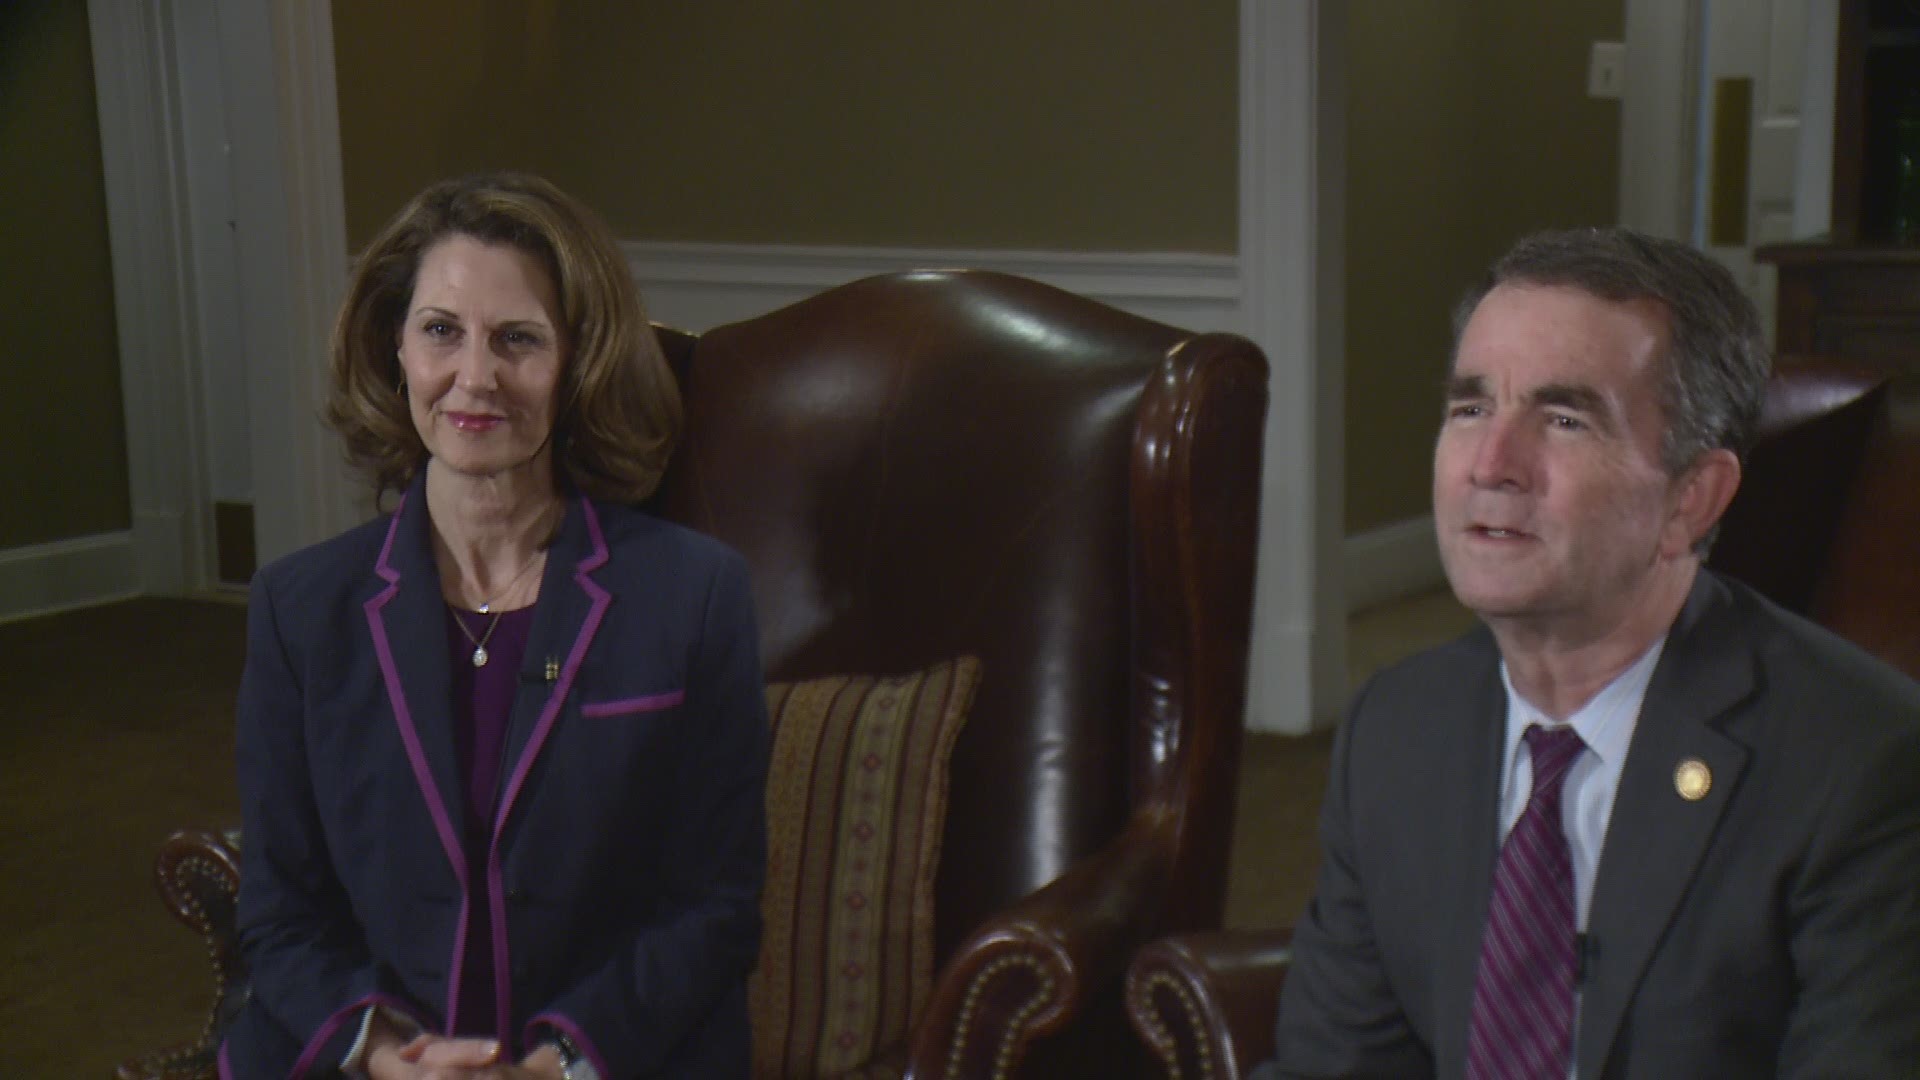 Governor Ralph Northam and First Lady Pamela Northam talk about STEM education in Virginia and the need for a new science center in Northern Virginia